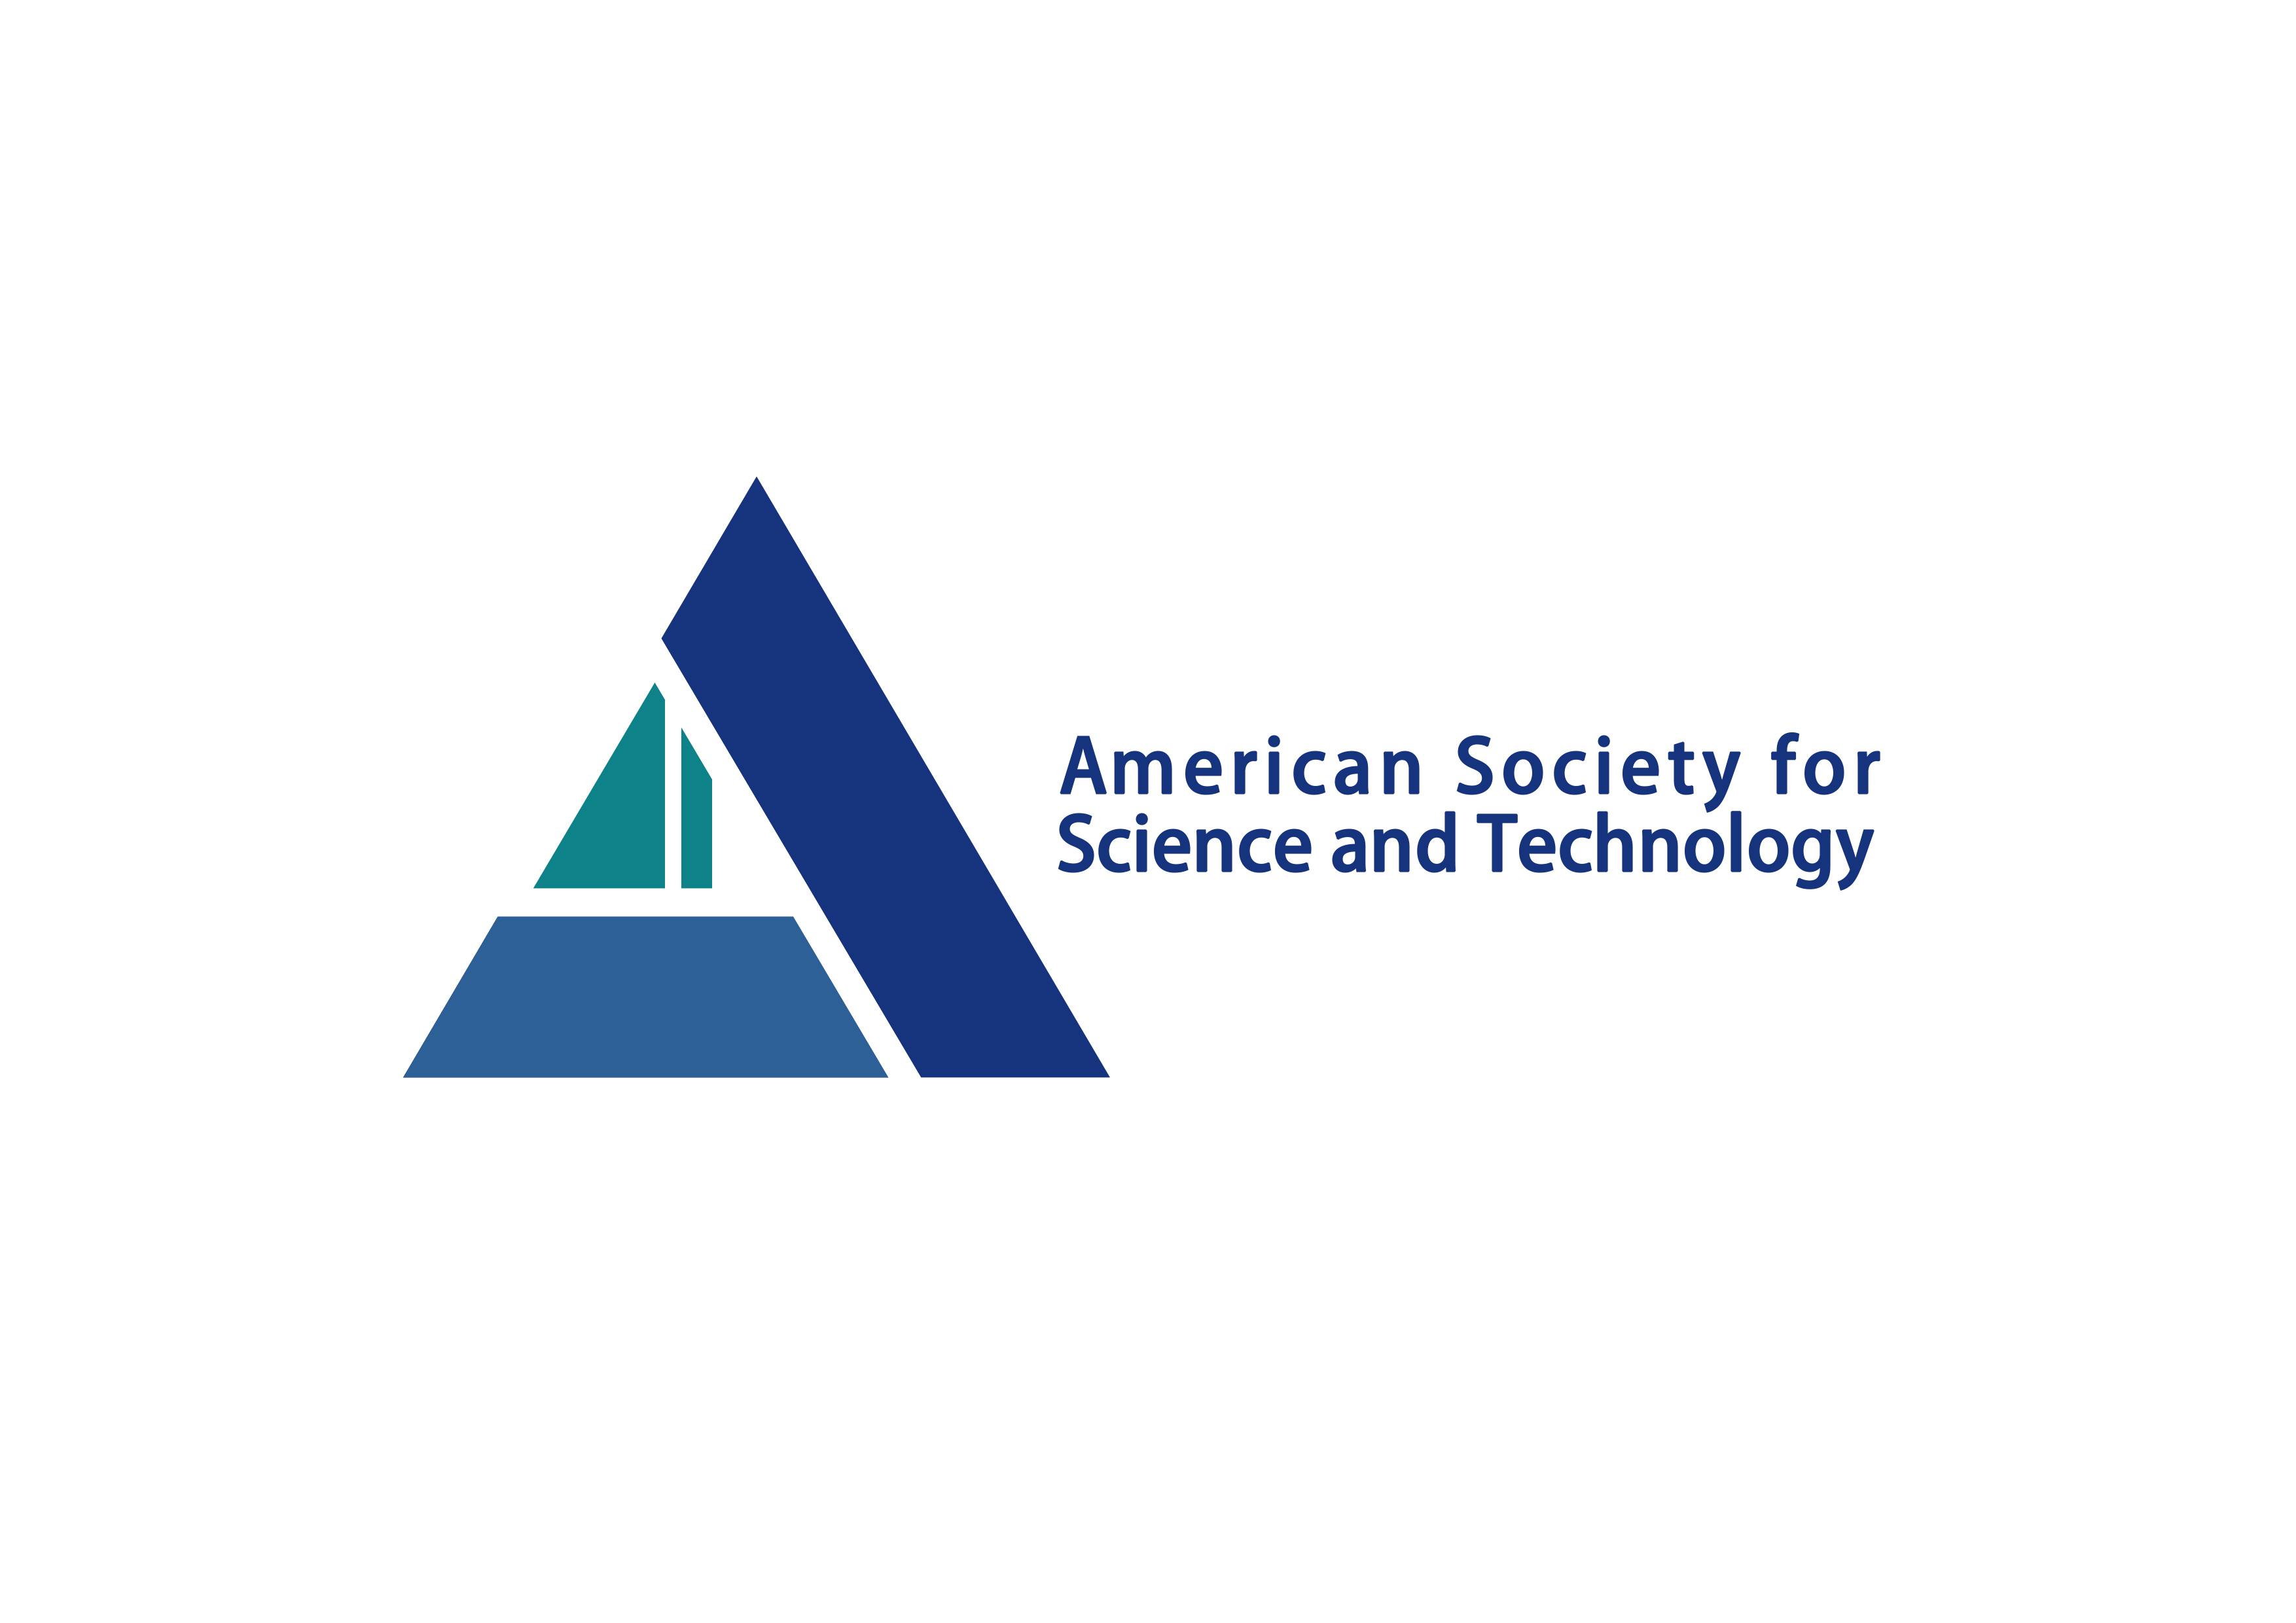  American Society for Science and Technology